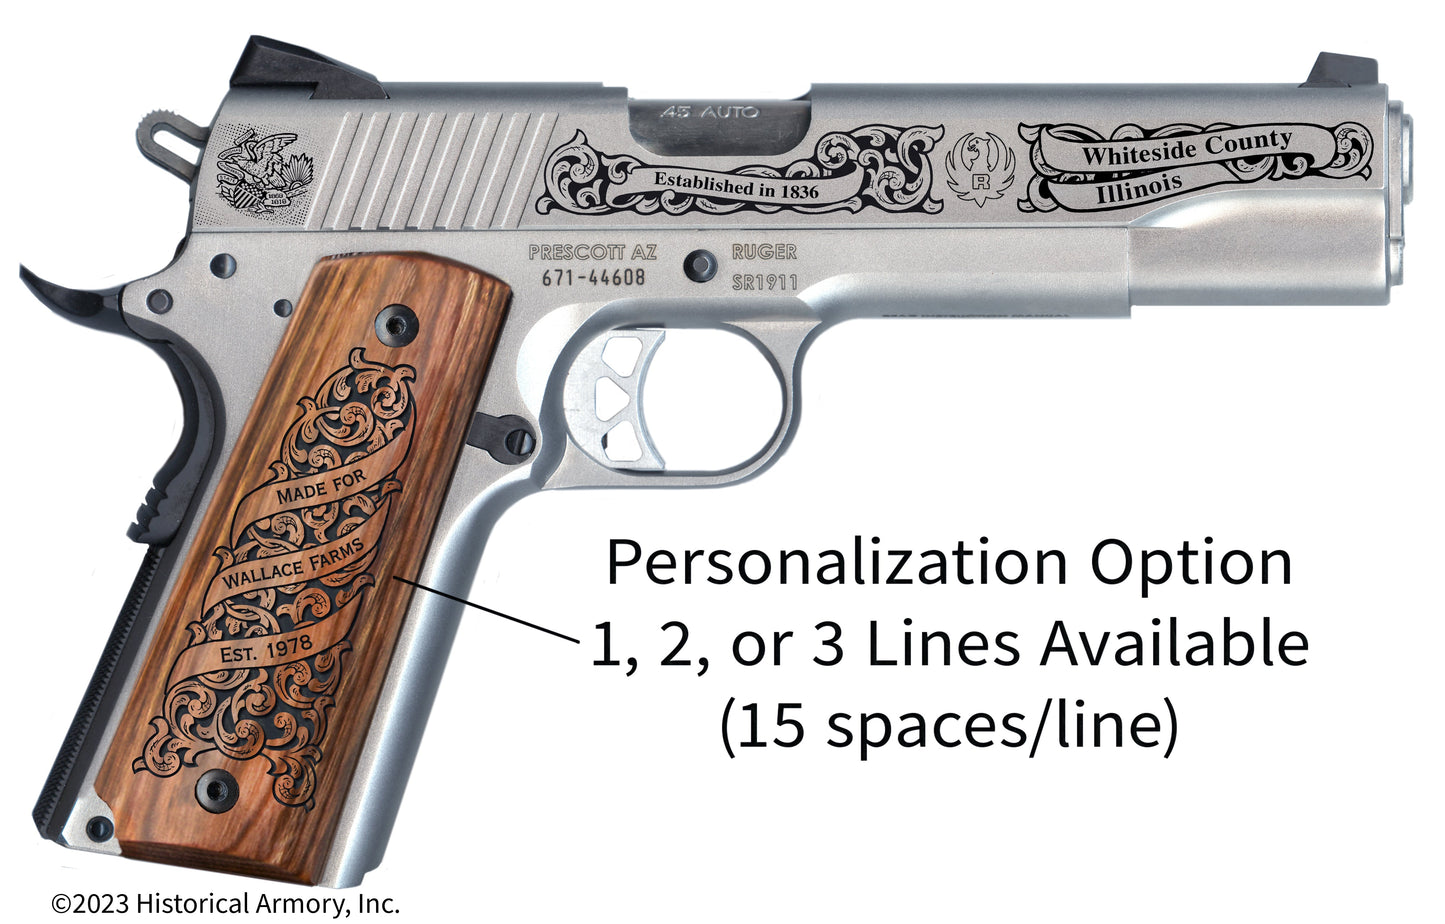 Whiteside County Illinois Personalized Engraved .45 Auto Ruger 1911